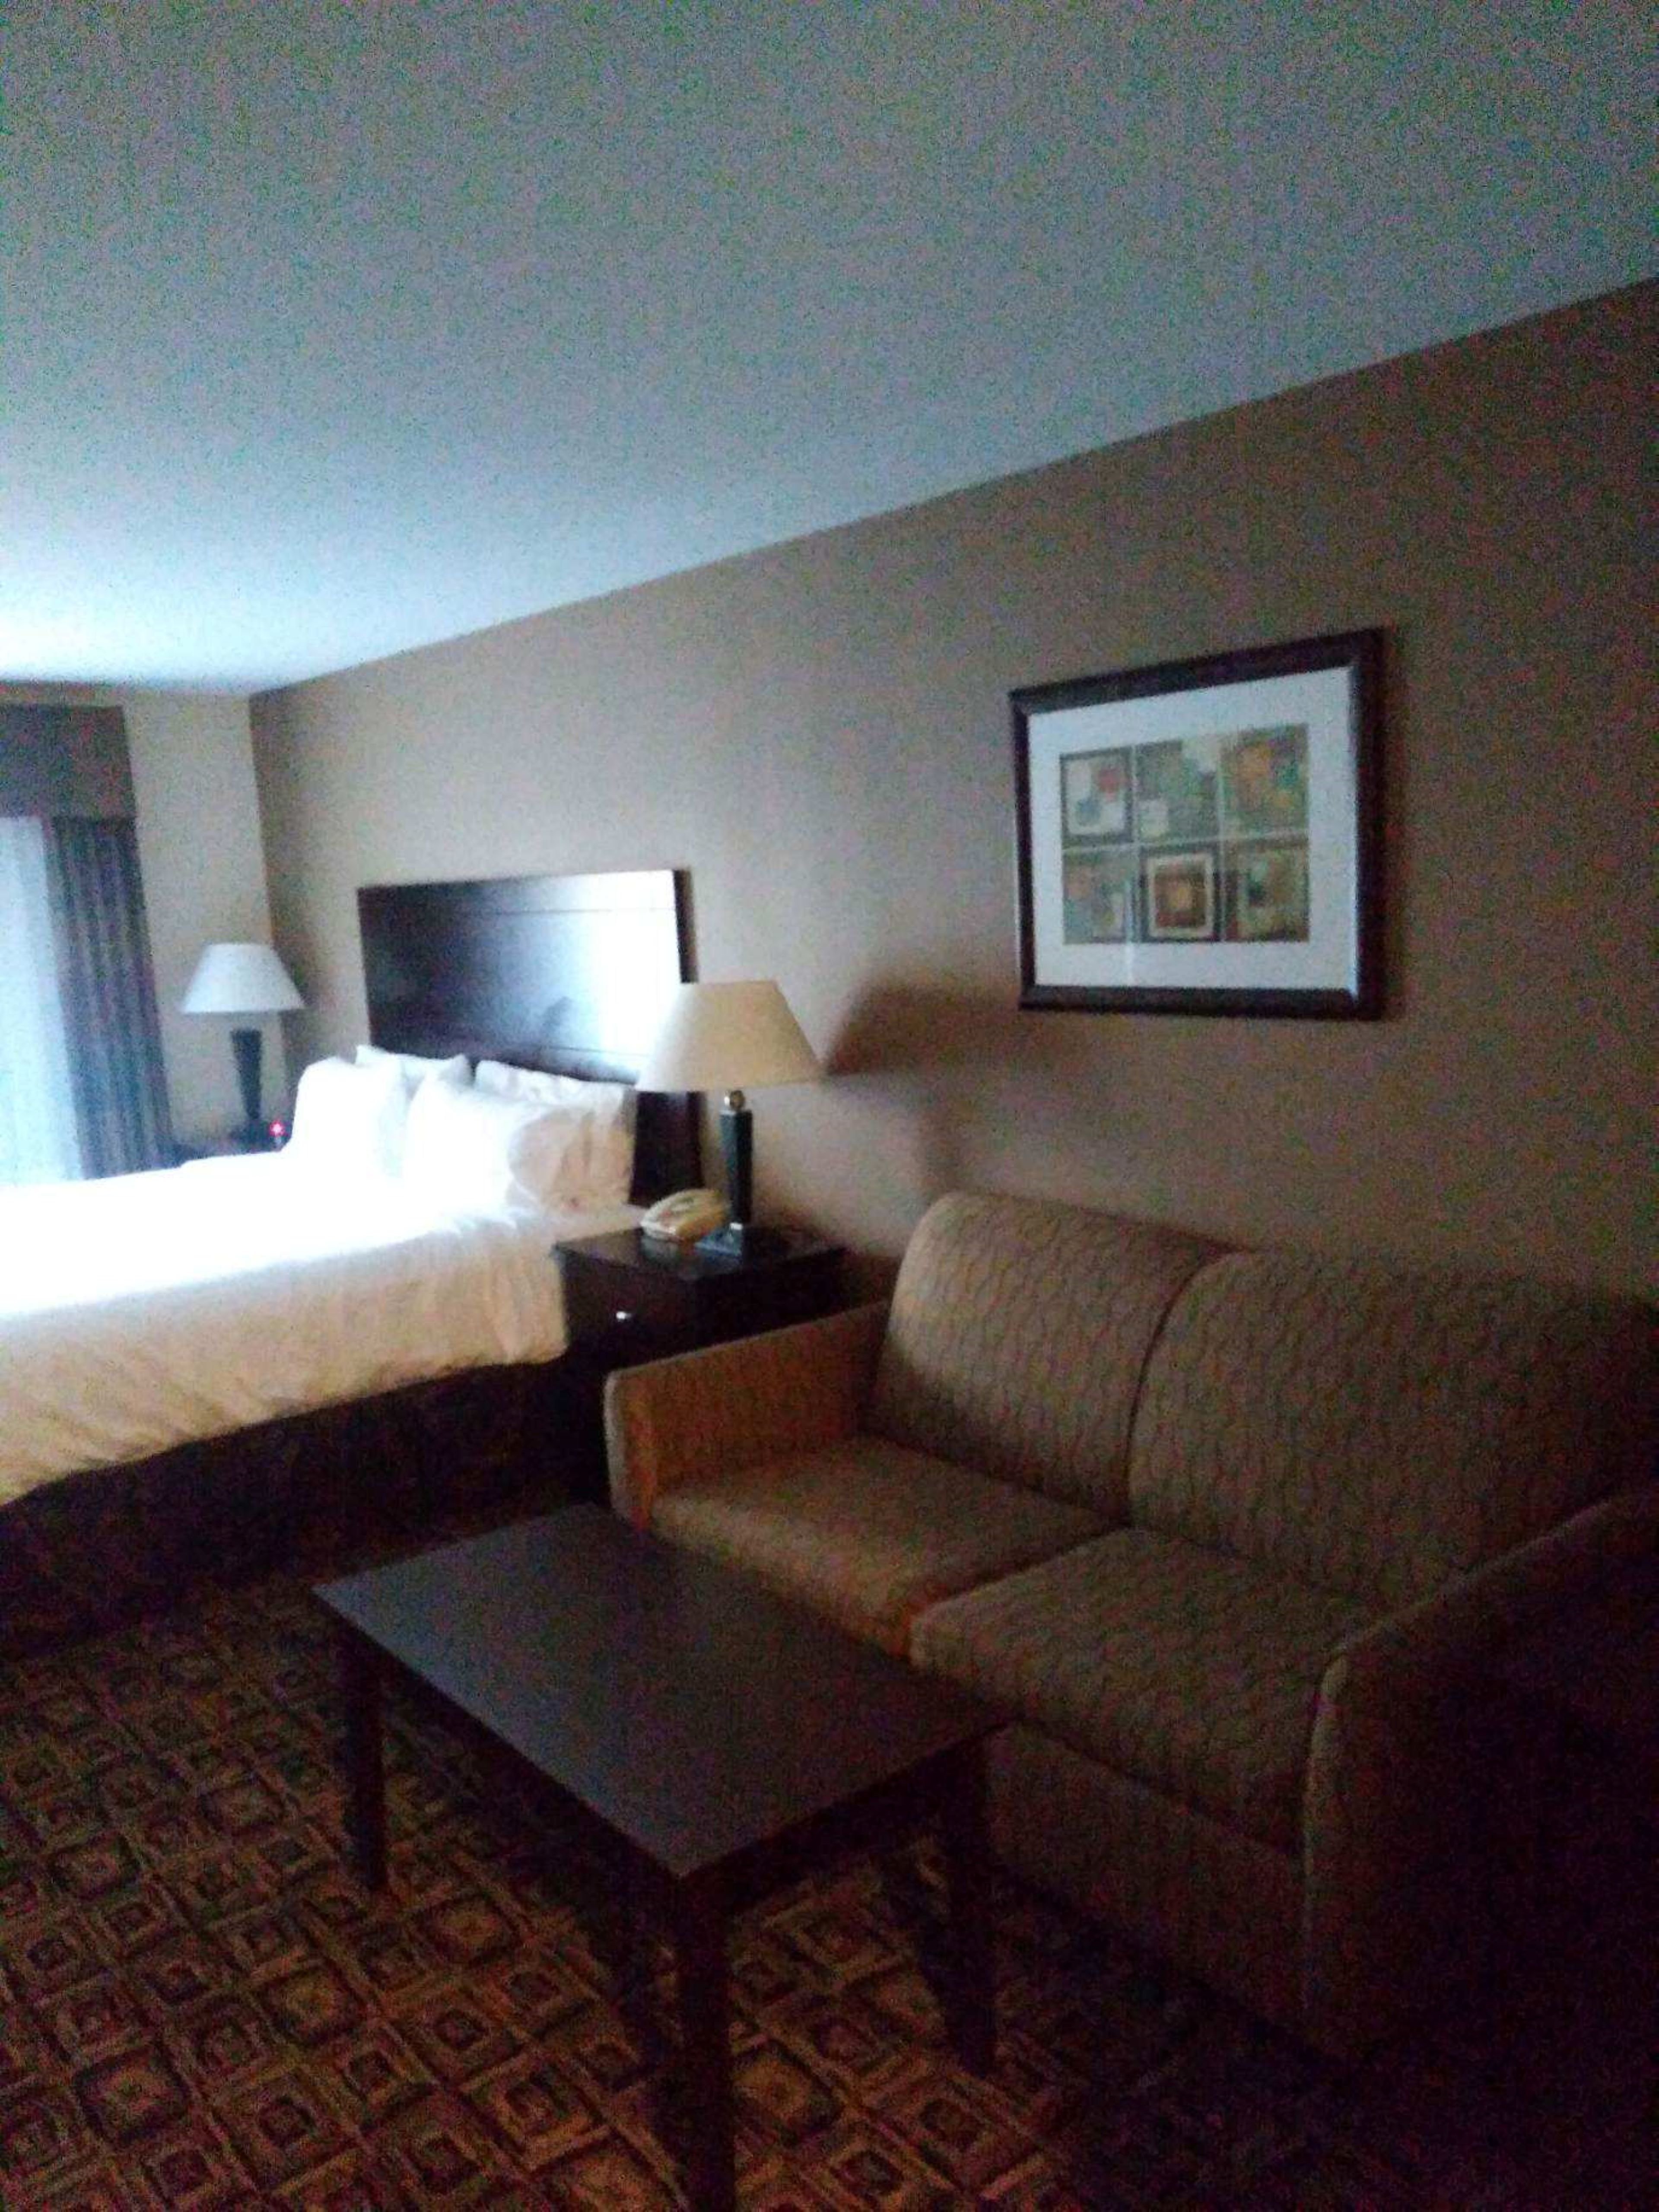 At the end of a long day, relax in our spacious guest room. 